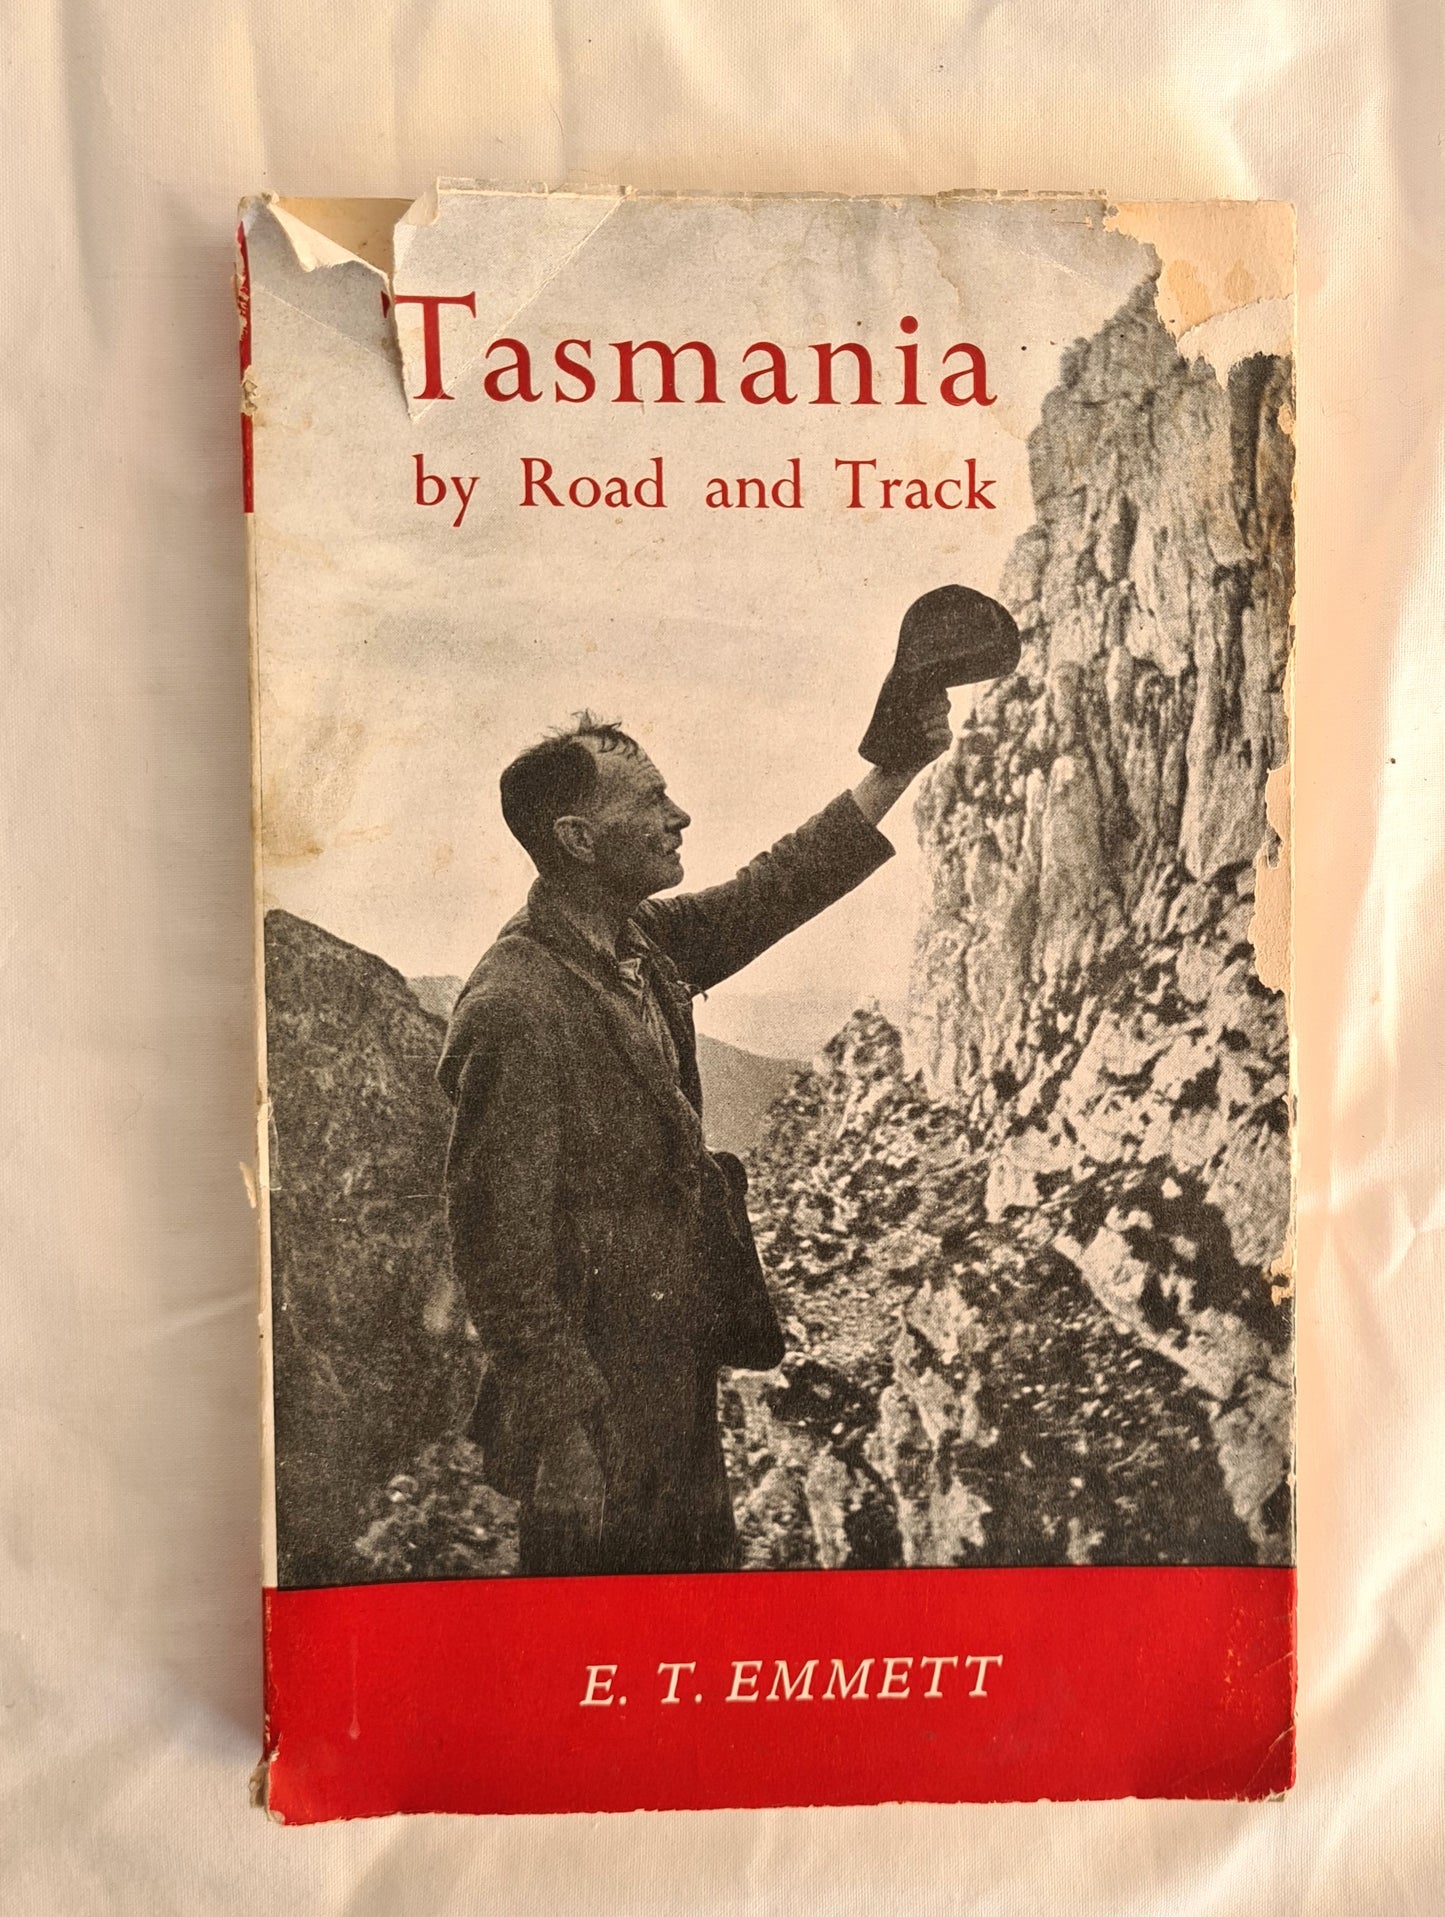 Tasmania  By Road and Track  by E. T. Emmett